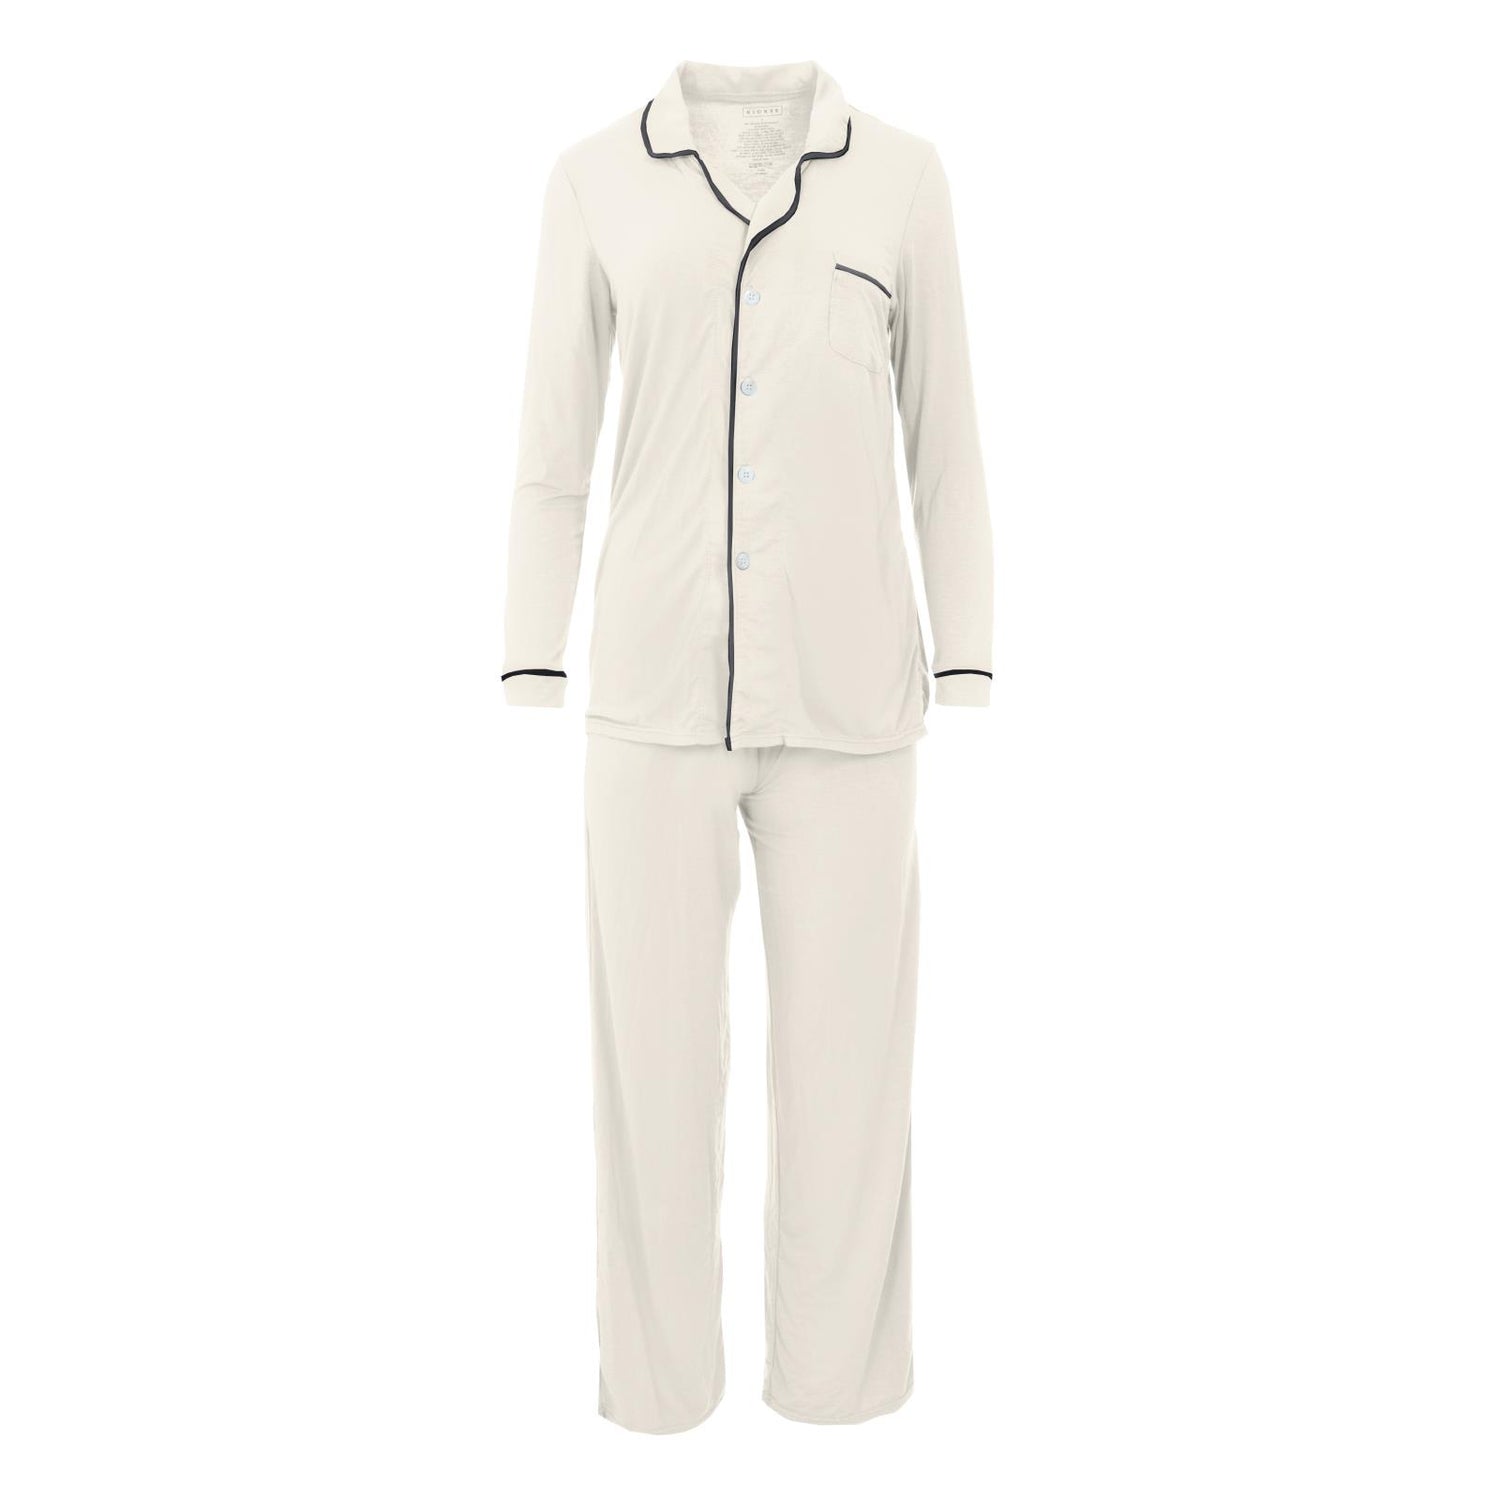 Women's Solid Long Sleeved Collared Pajama Set in Natural with Deep Space